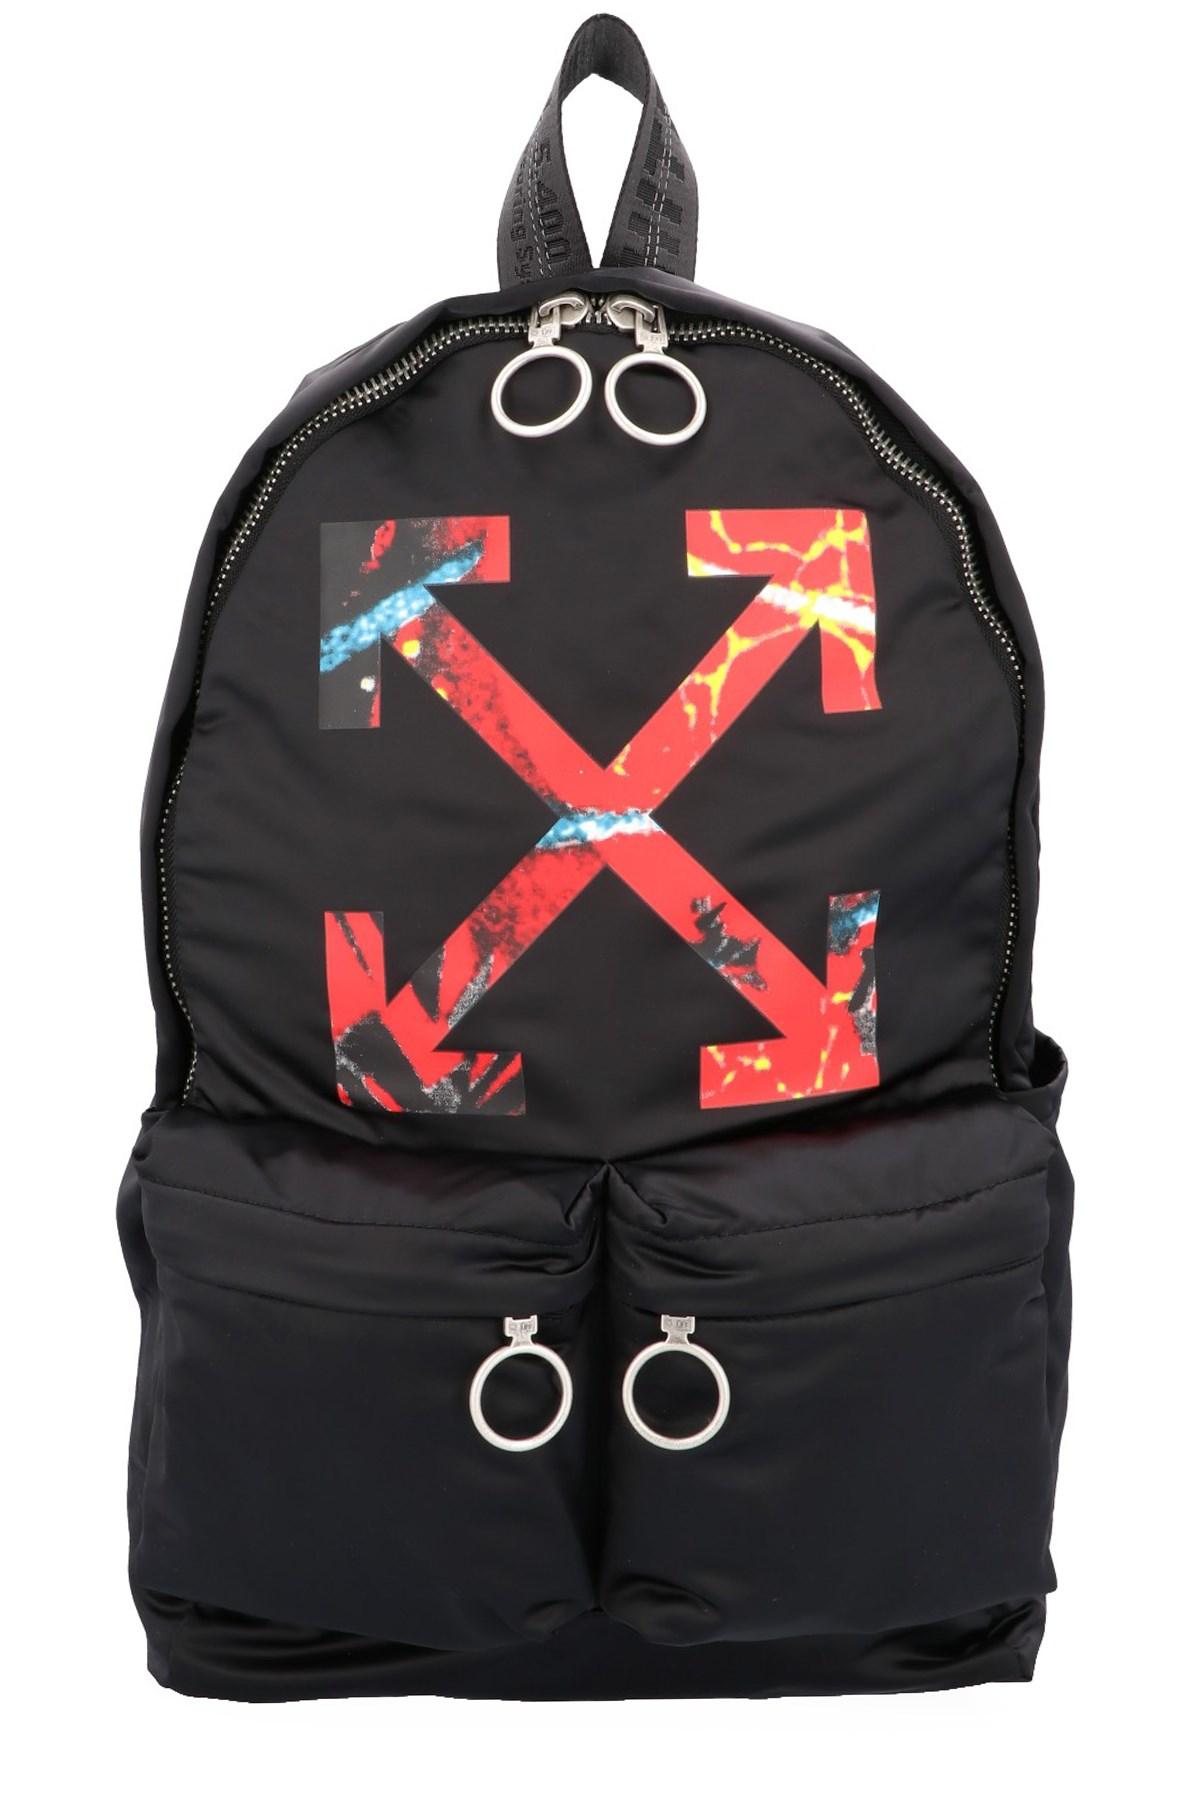 OFF-WHITE Arrow Print Backpack Black/Yellow in Polyester - US